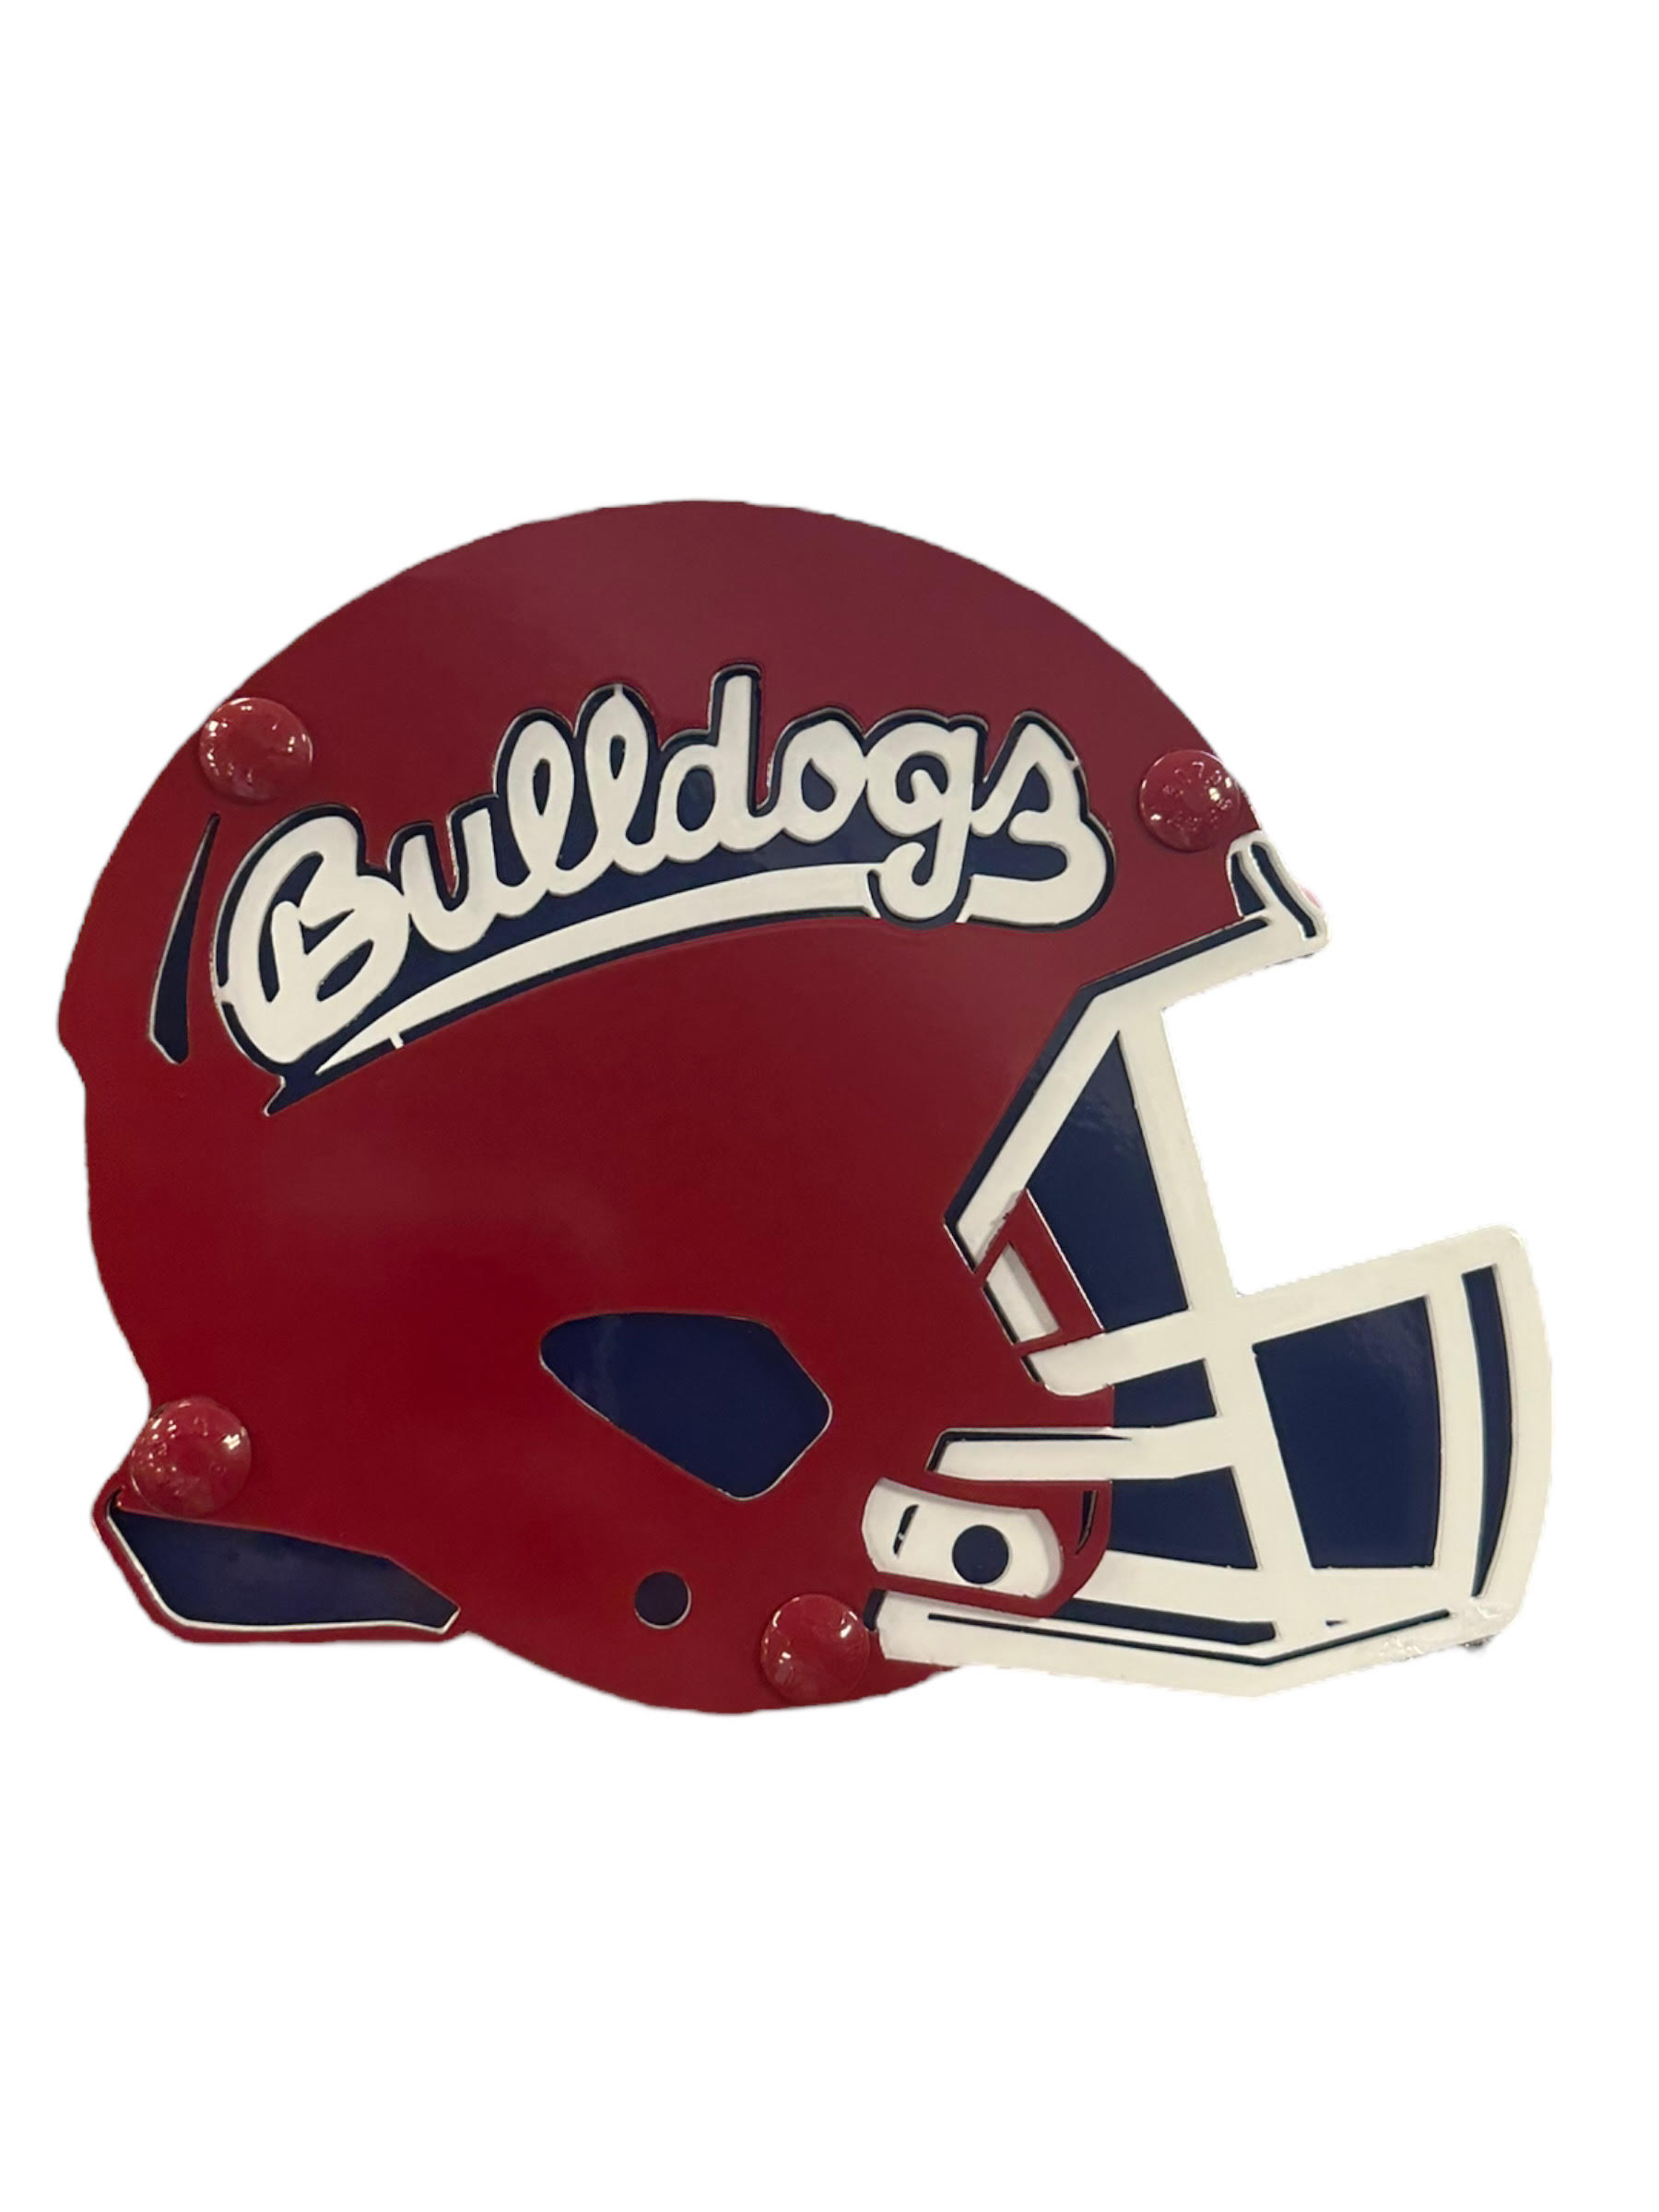 FRESNO STATE BULLDOGS HITCH COVER – JR'S SPORTS